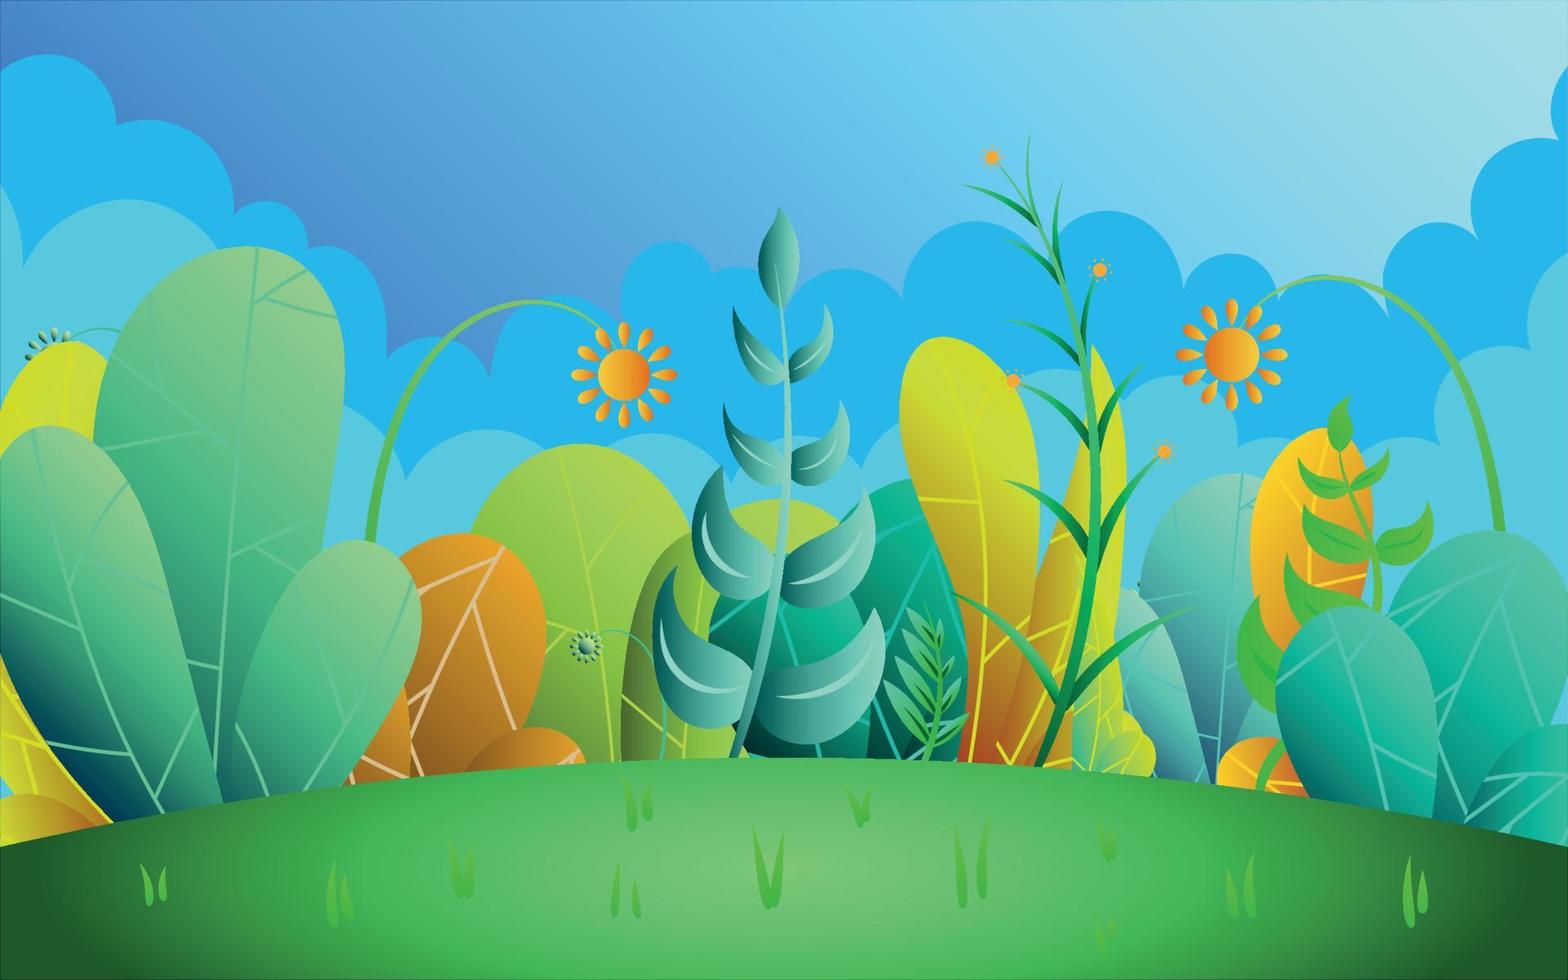 background with illustration of landscape of cartoon style plants with sky in the afternoon, vector